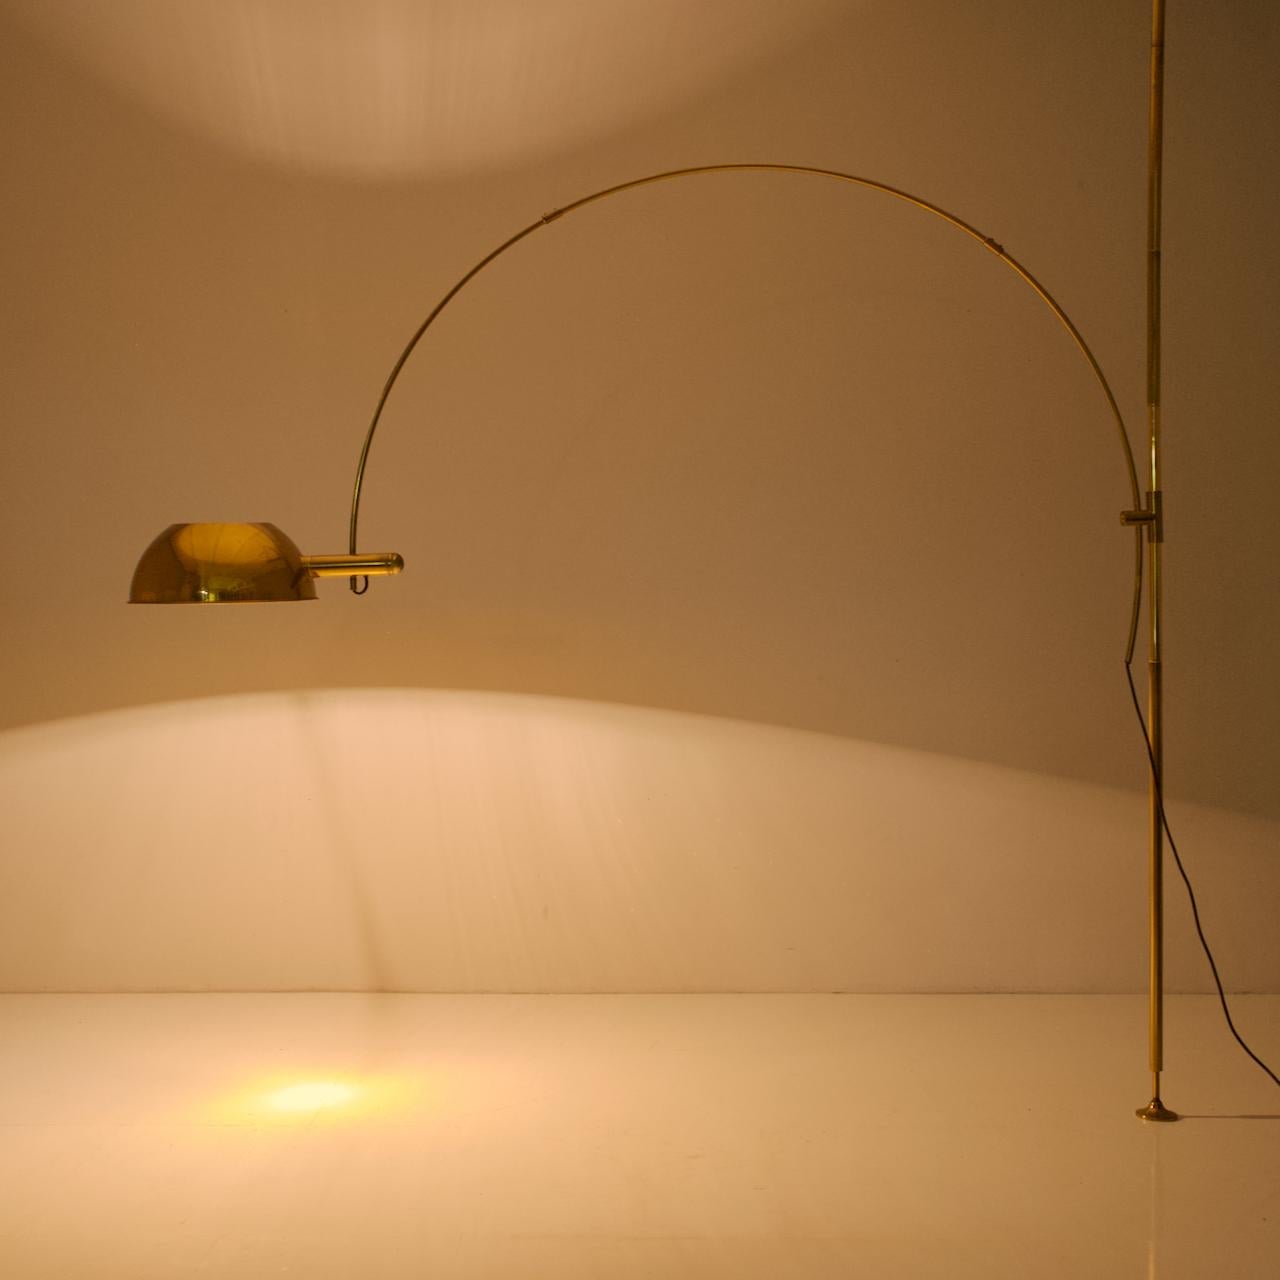 Large height-adjustable brass arc lamp by Florian Schulz, Germany 1970s.
The lamp is fixed by means of floor ceilings clamps. The arm is swivelling and height adjustable,
Measures: The lamp can be mounted up to a ceiling height of 355 cm or